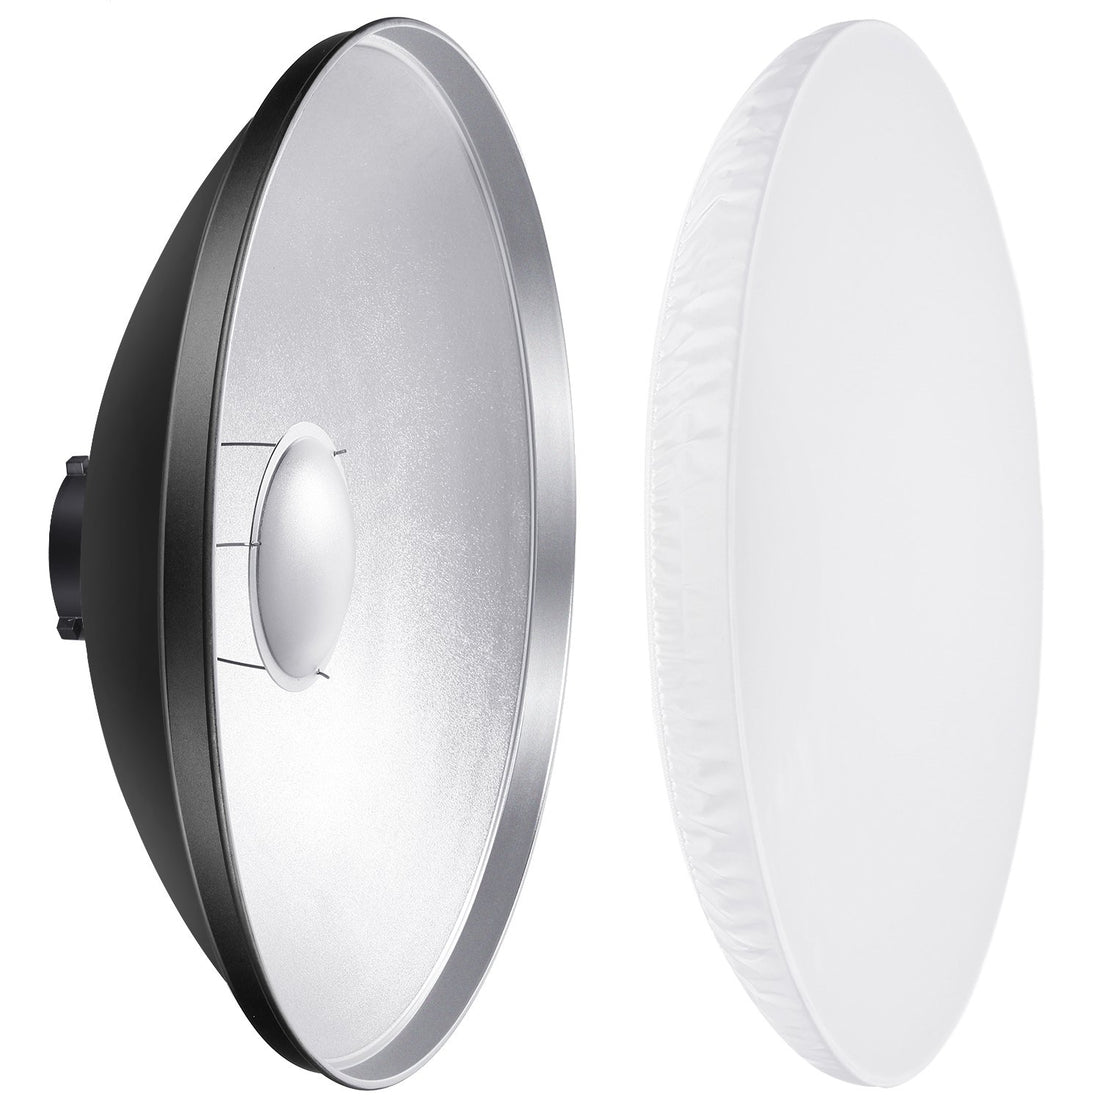 Neewer 16 inches/41 centimeters Aluminum Standard Reflector Beauty Dish with White Diffuser Sock for Bowens Mount Studio Strobe Flash Light Like Neewer Vision 4 VC-400HS VC-300HH VC-300HHLR VE-300